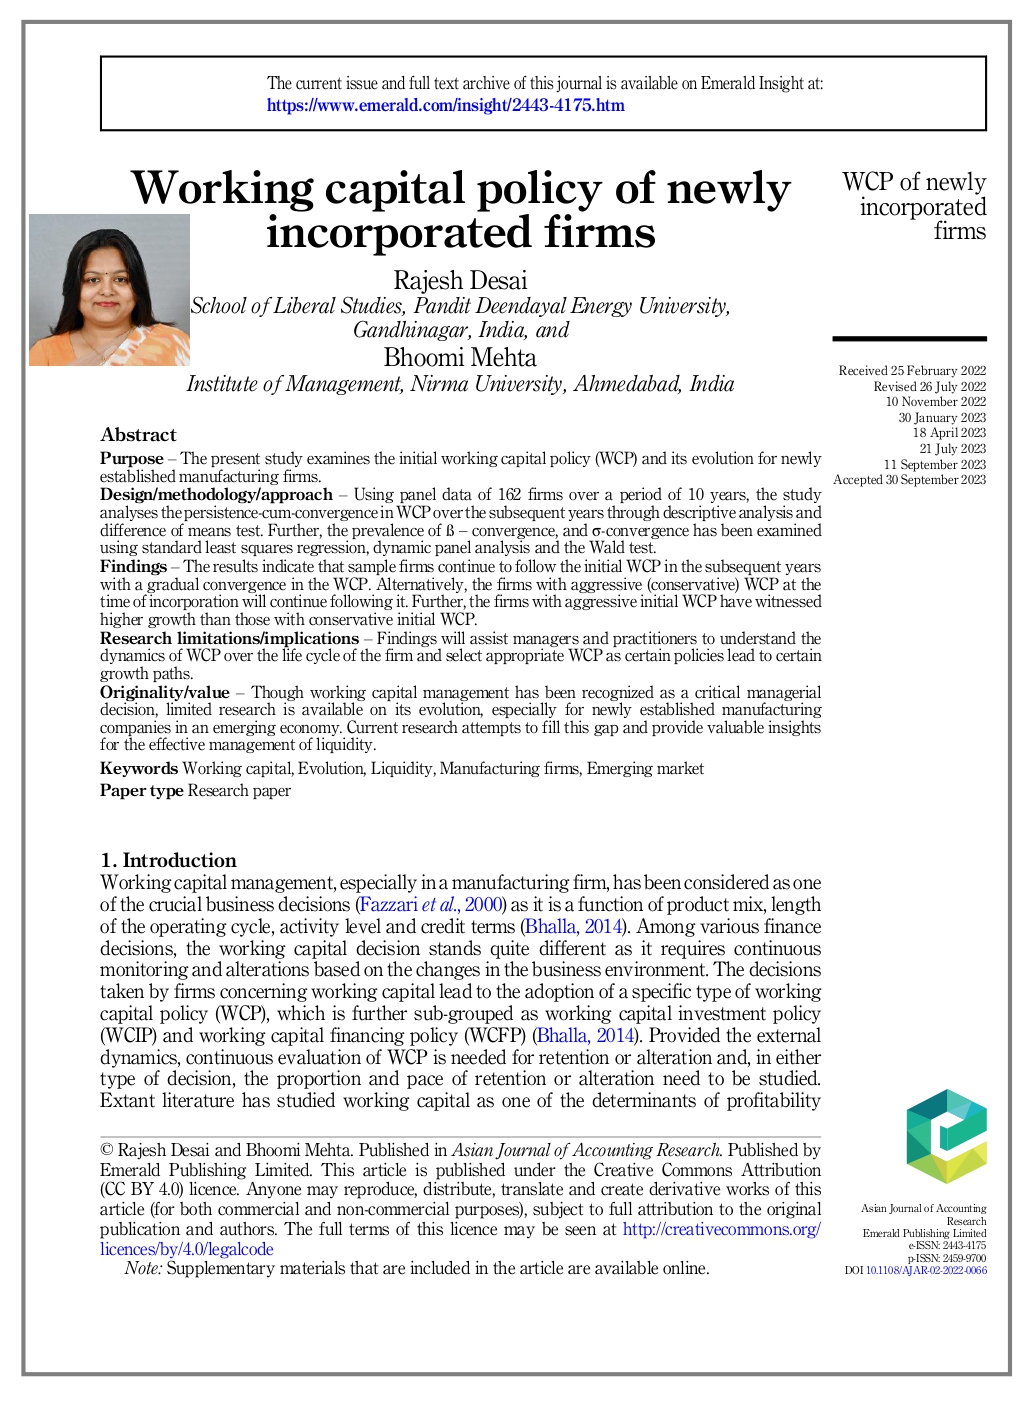 Working capital policy of newly incorporated firms